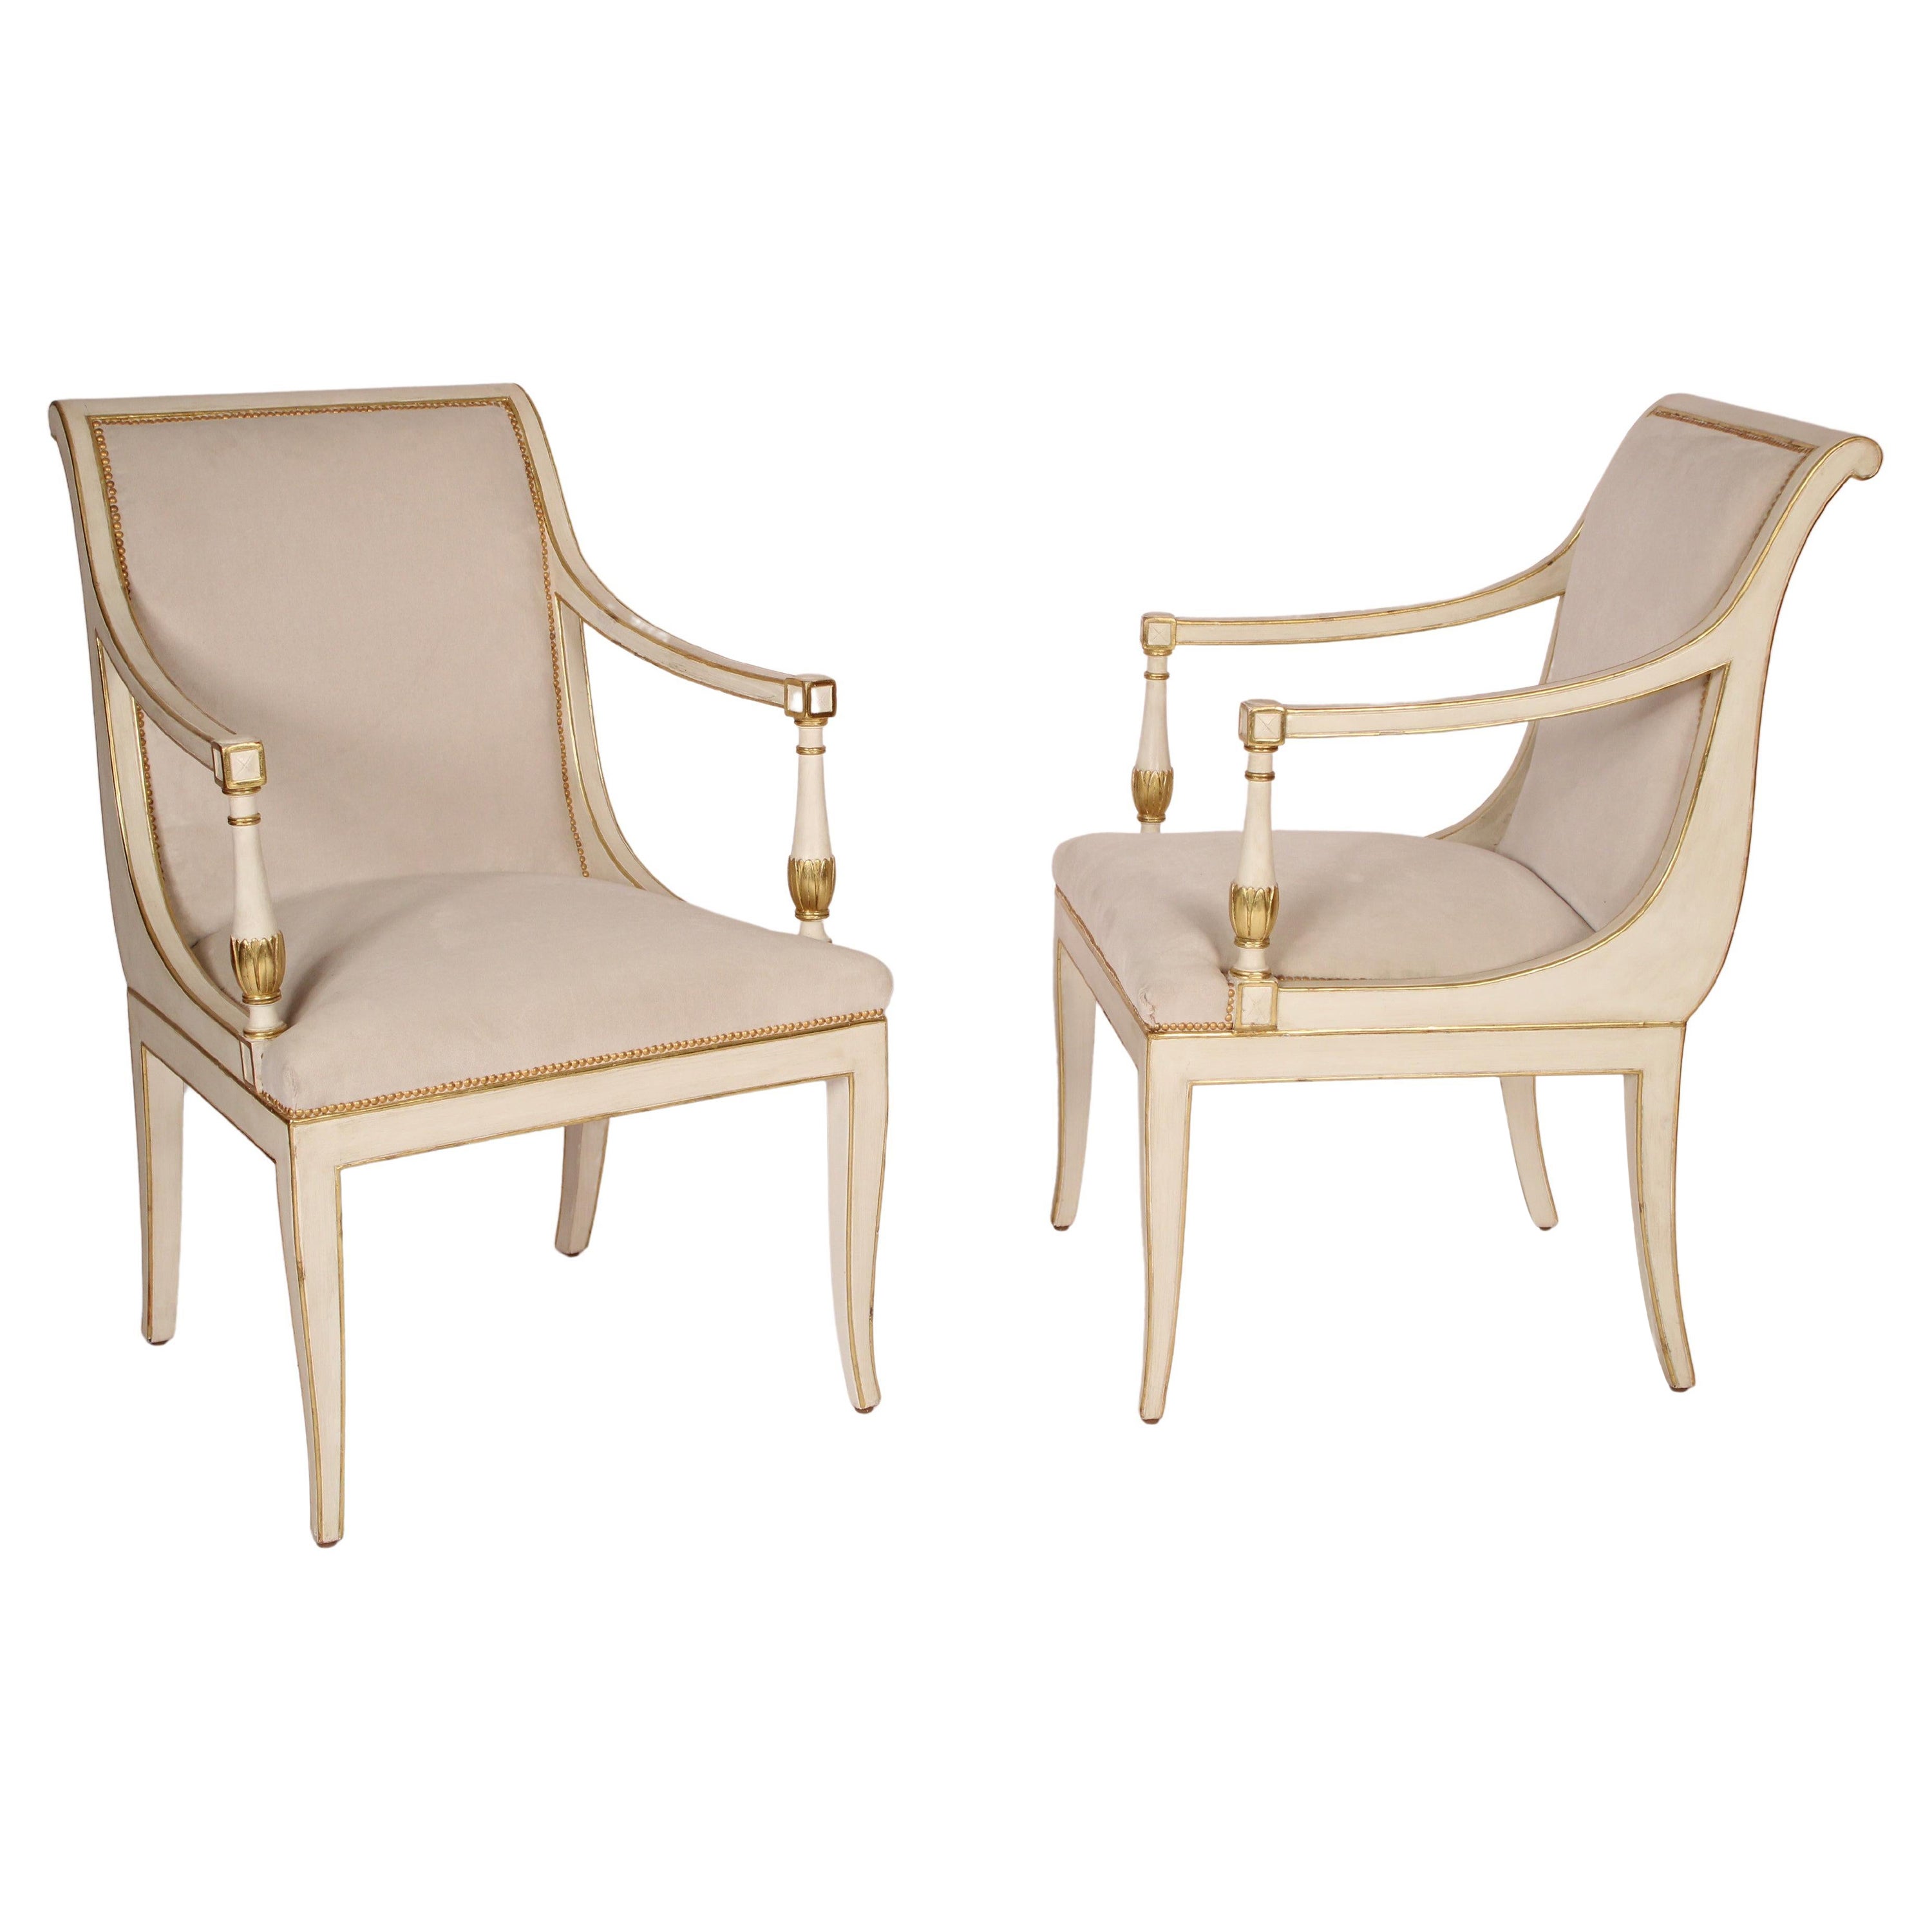 Pair of Neo Classical Style Painted and Gilt Decorated Armchairs